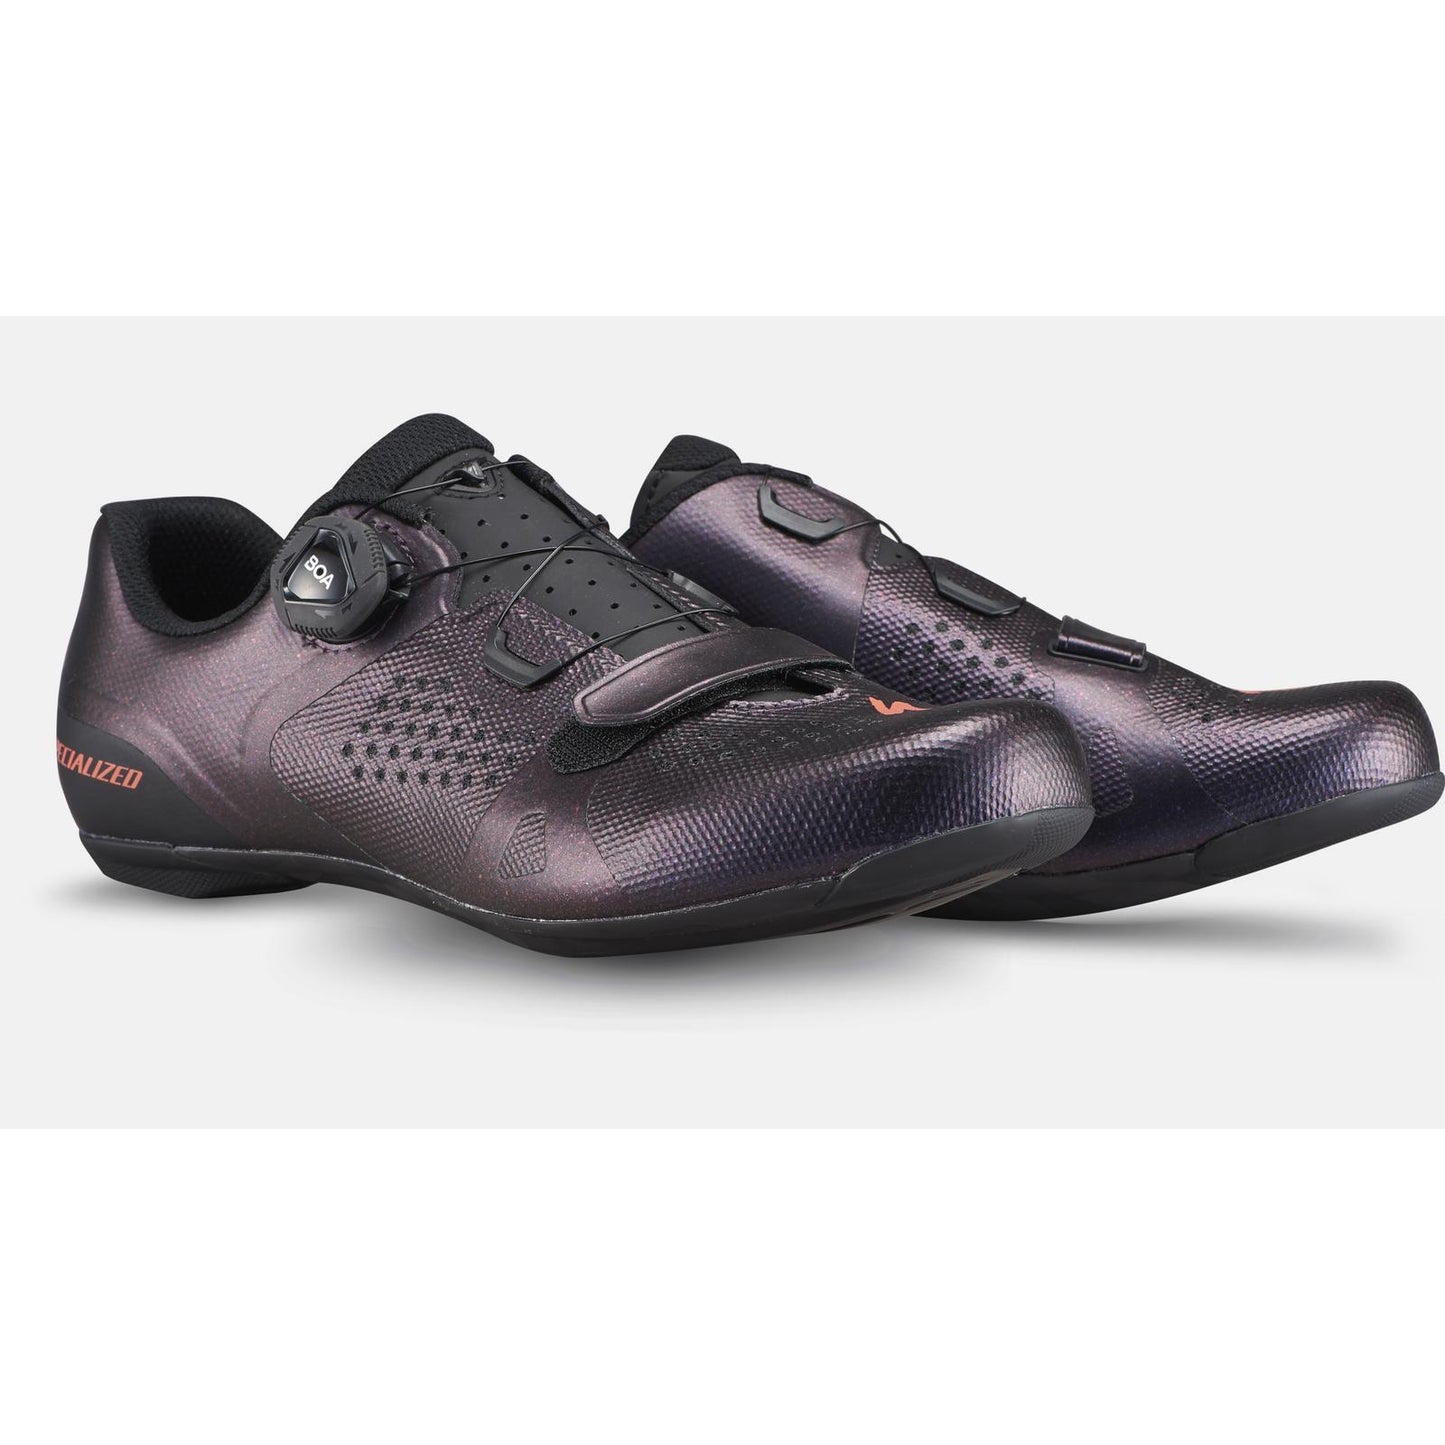 Specialized Torch 2.0 Road Shoes - Shoes - Bicycle Warehouse